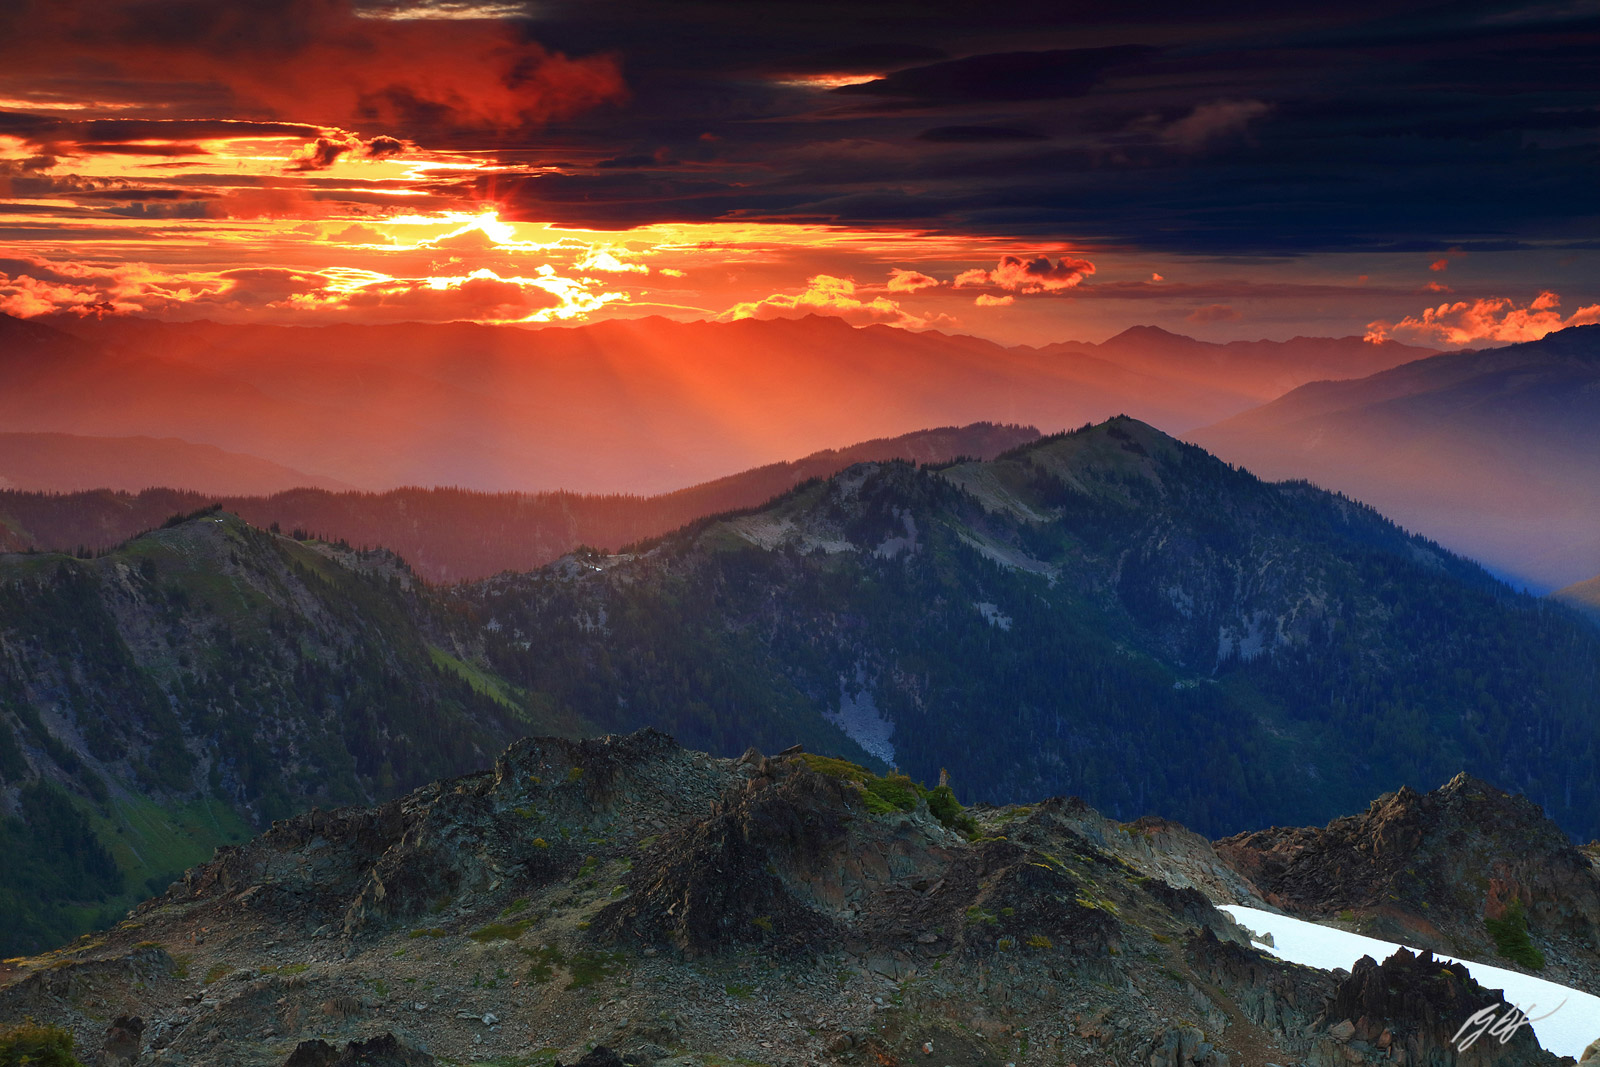 Sunset Sunrays from Grand Peak in the Olympic National Park Backcountry in Washington